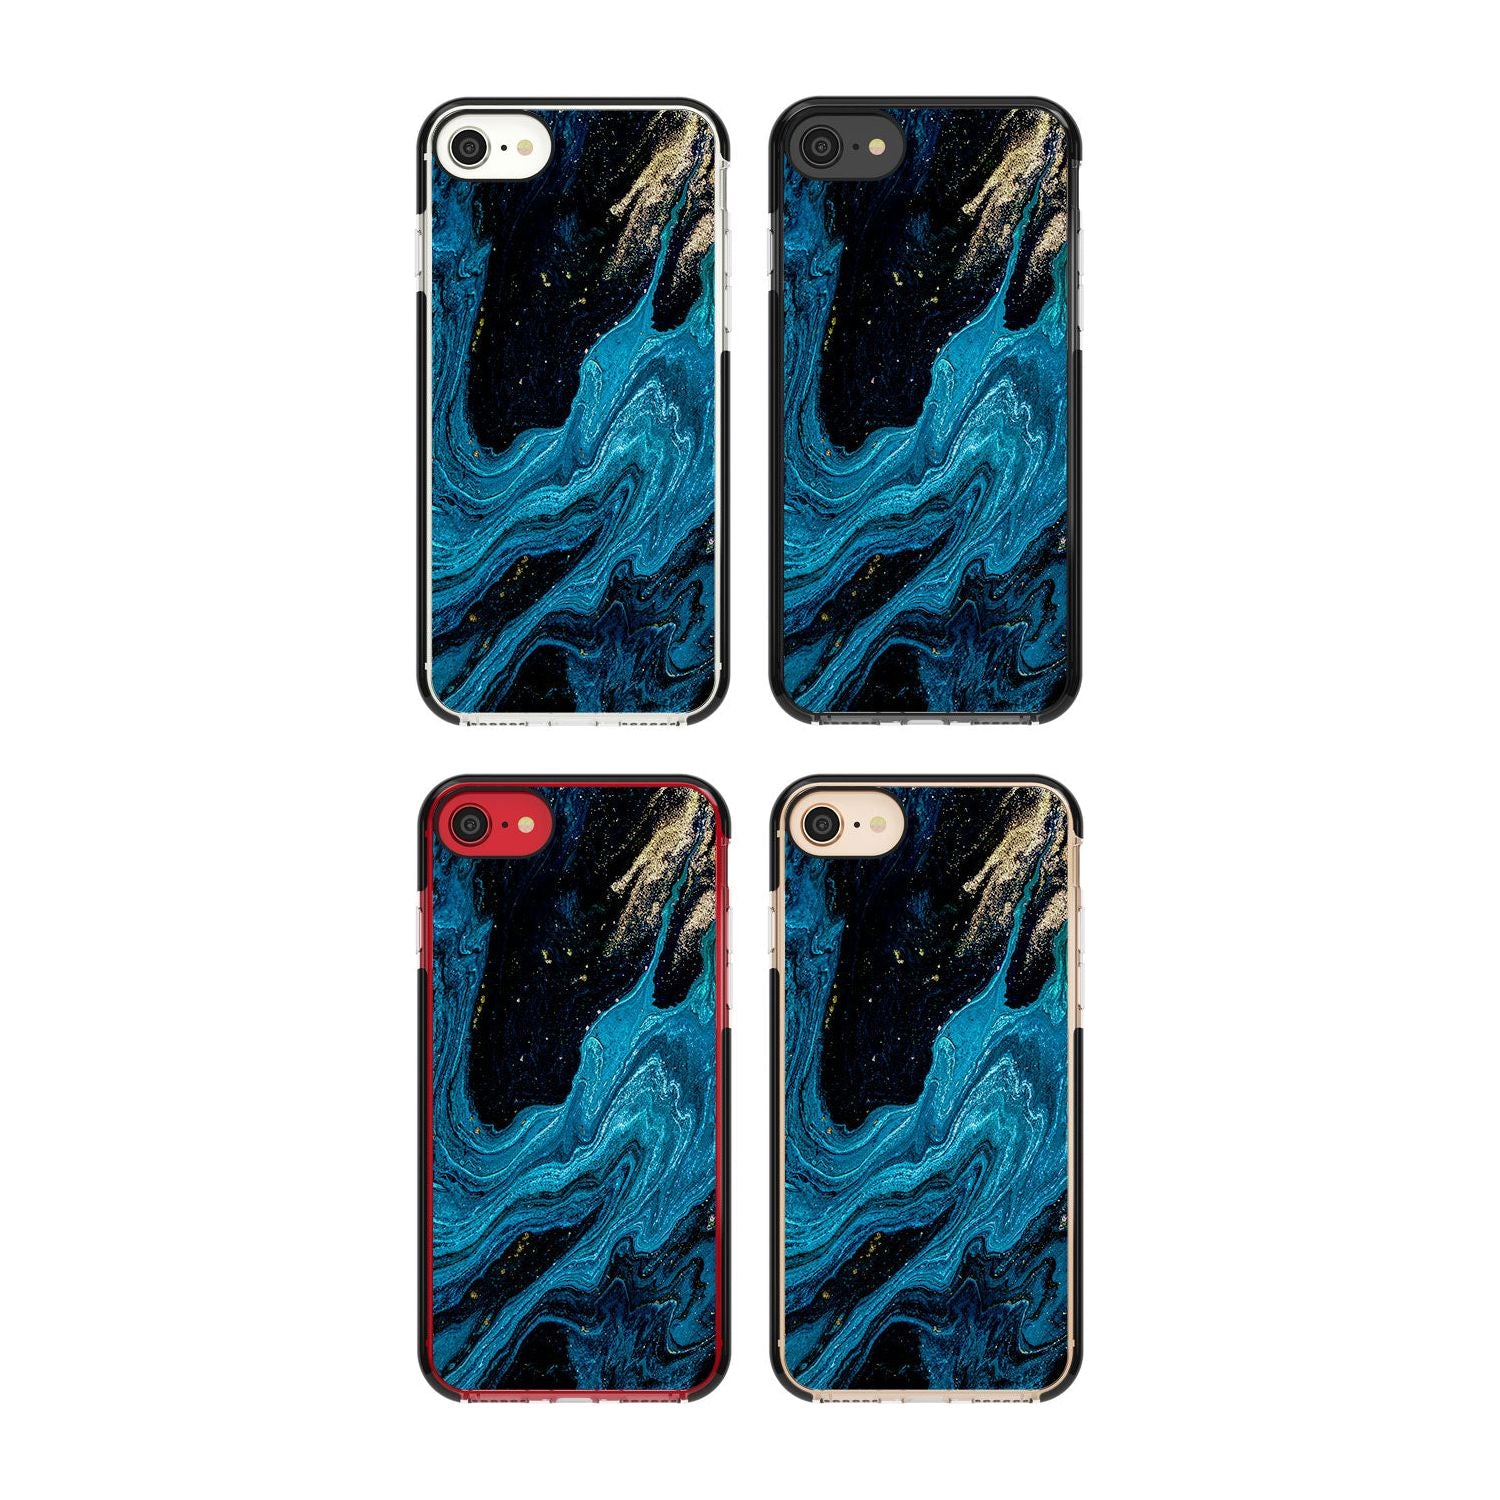 Saphire Lagoon Phone Case for iPhone SE